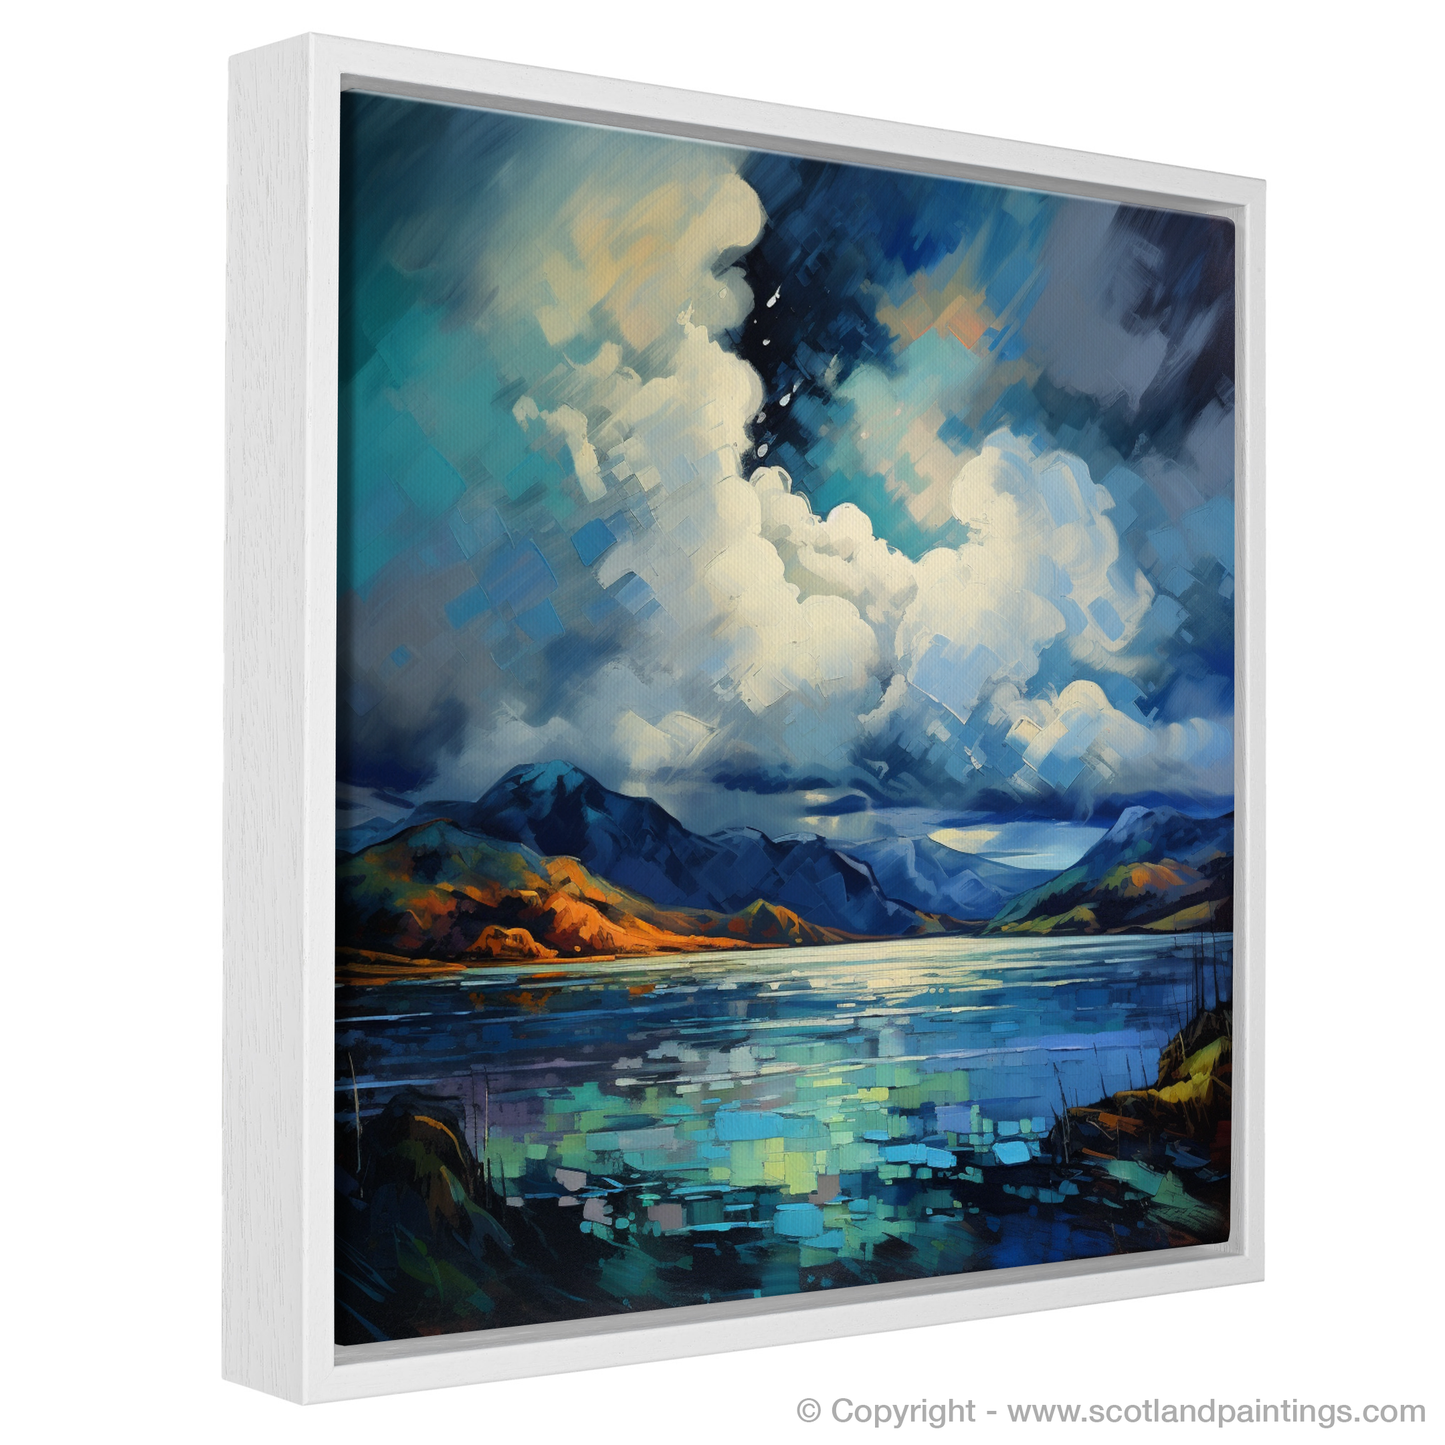 Painting and Art Print of Storm clouds above Loch Lomond entitled "Storm Cloud Majesty over Loch Lomond".